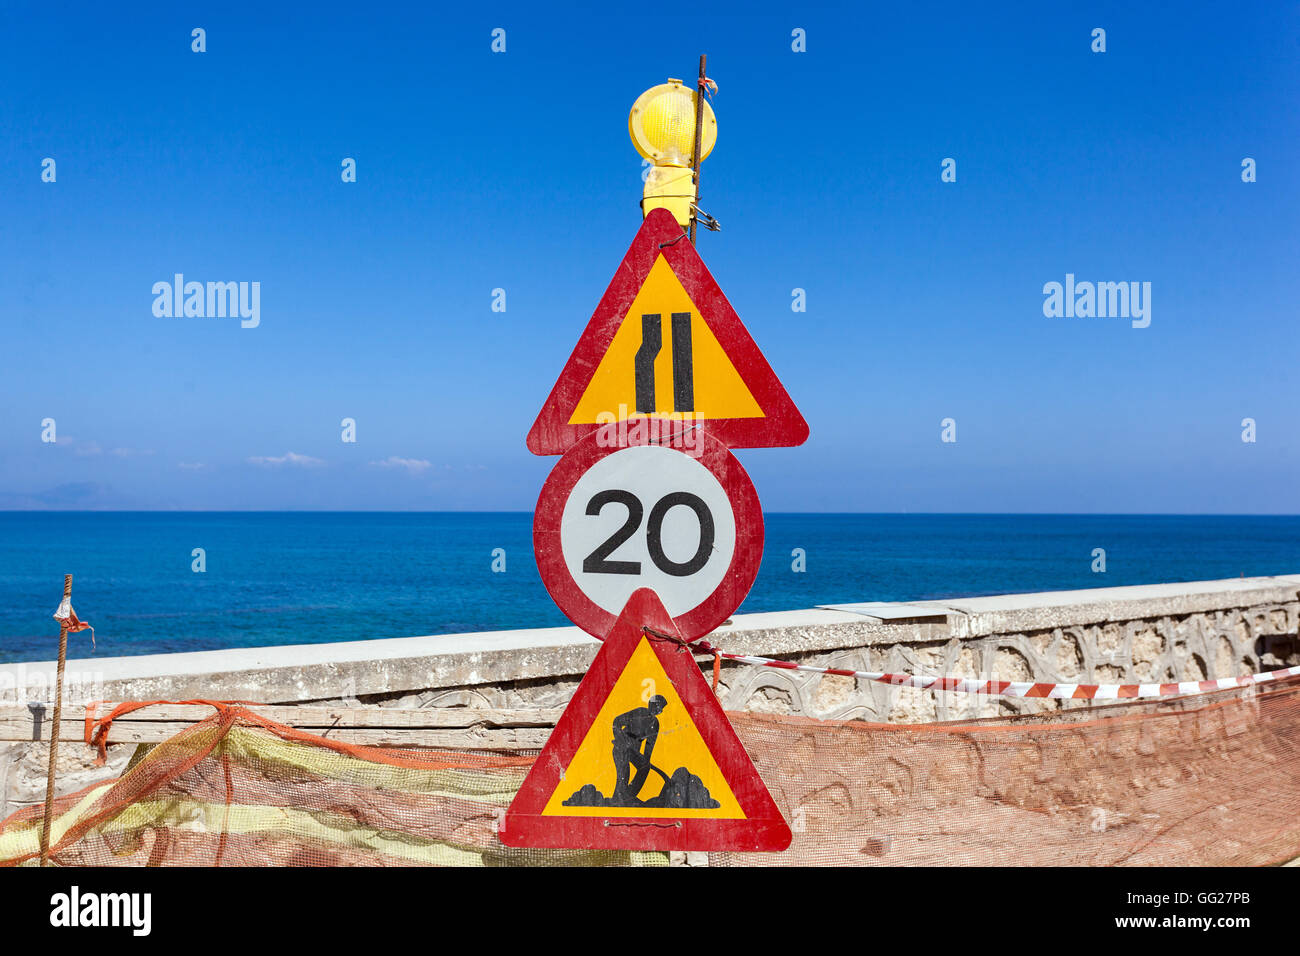 Repairing the road along the sea, road signs, Rethymno, Crete, Greece Stock Photo